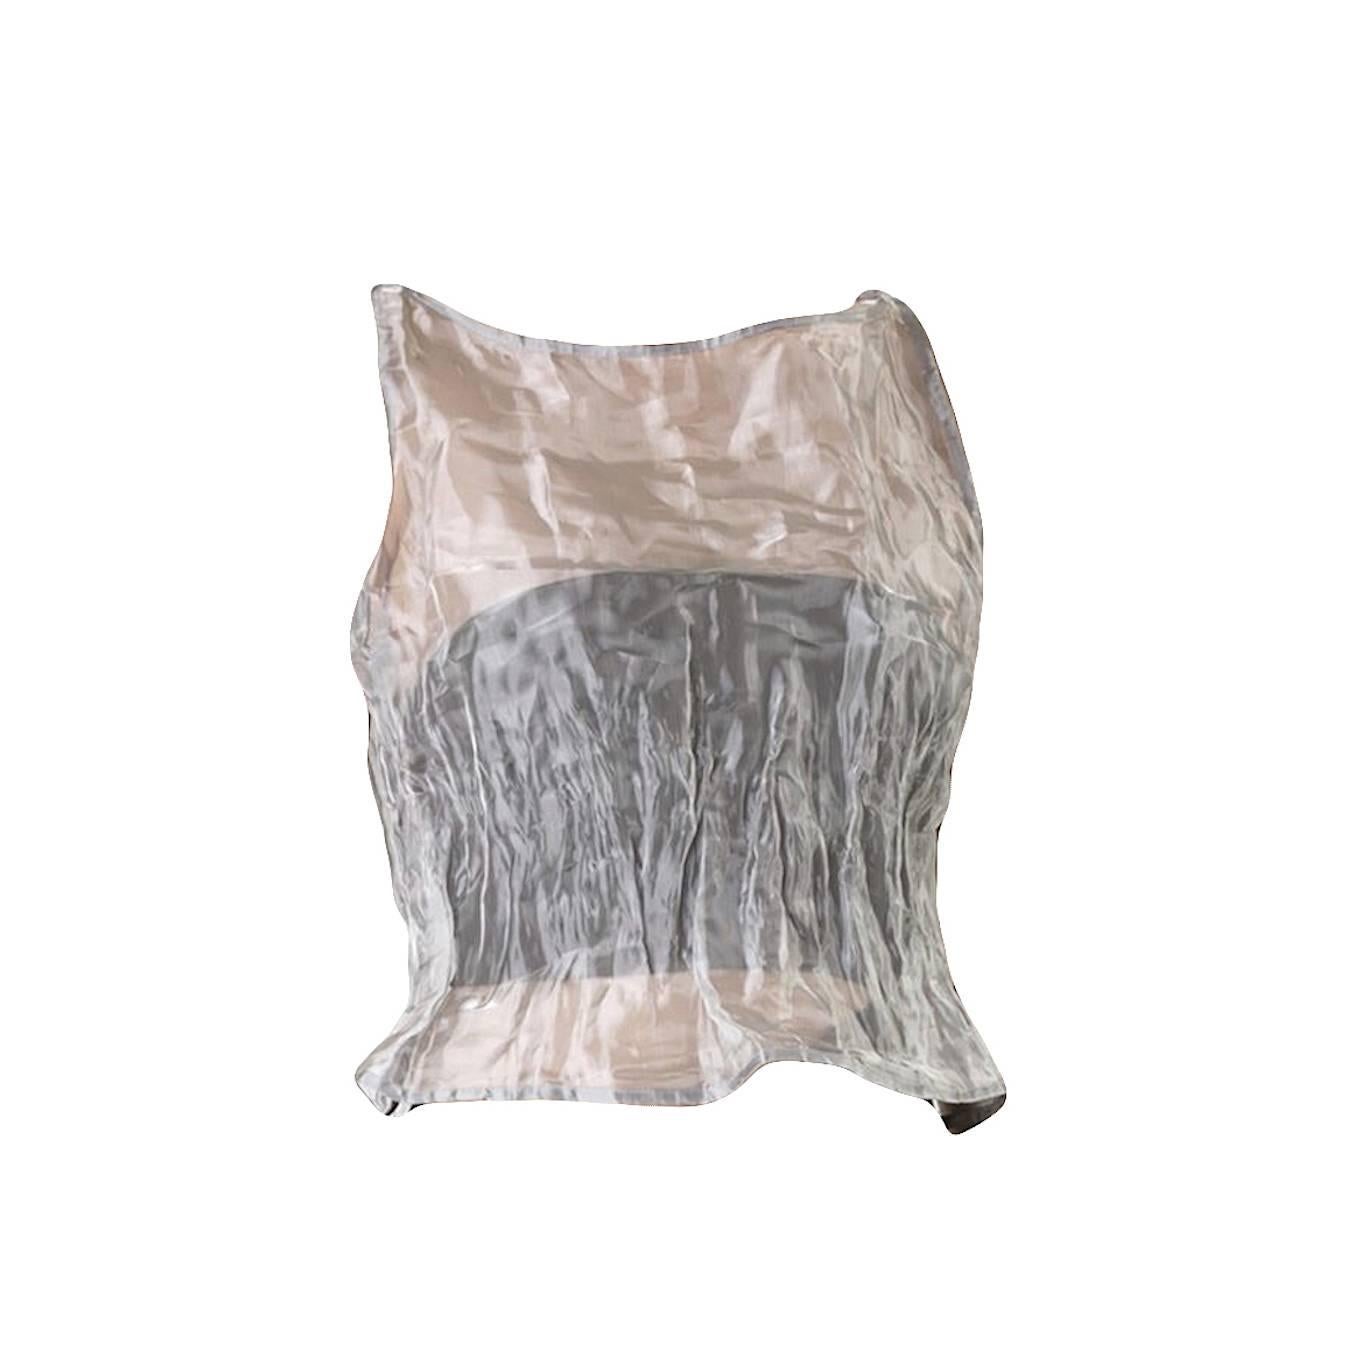 Incredibly Rare Iris Van Herpen Blouse Made of Stainless Steel For Sale